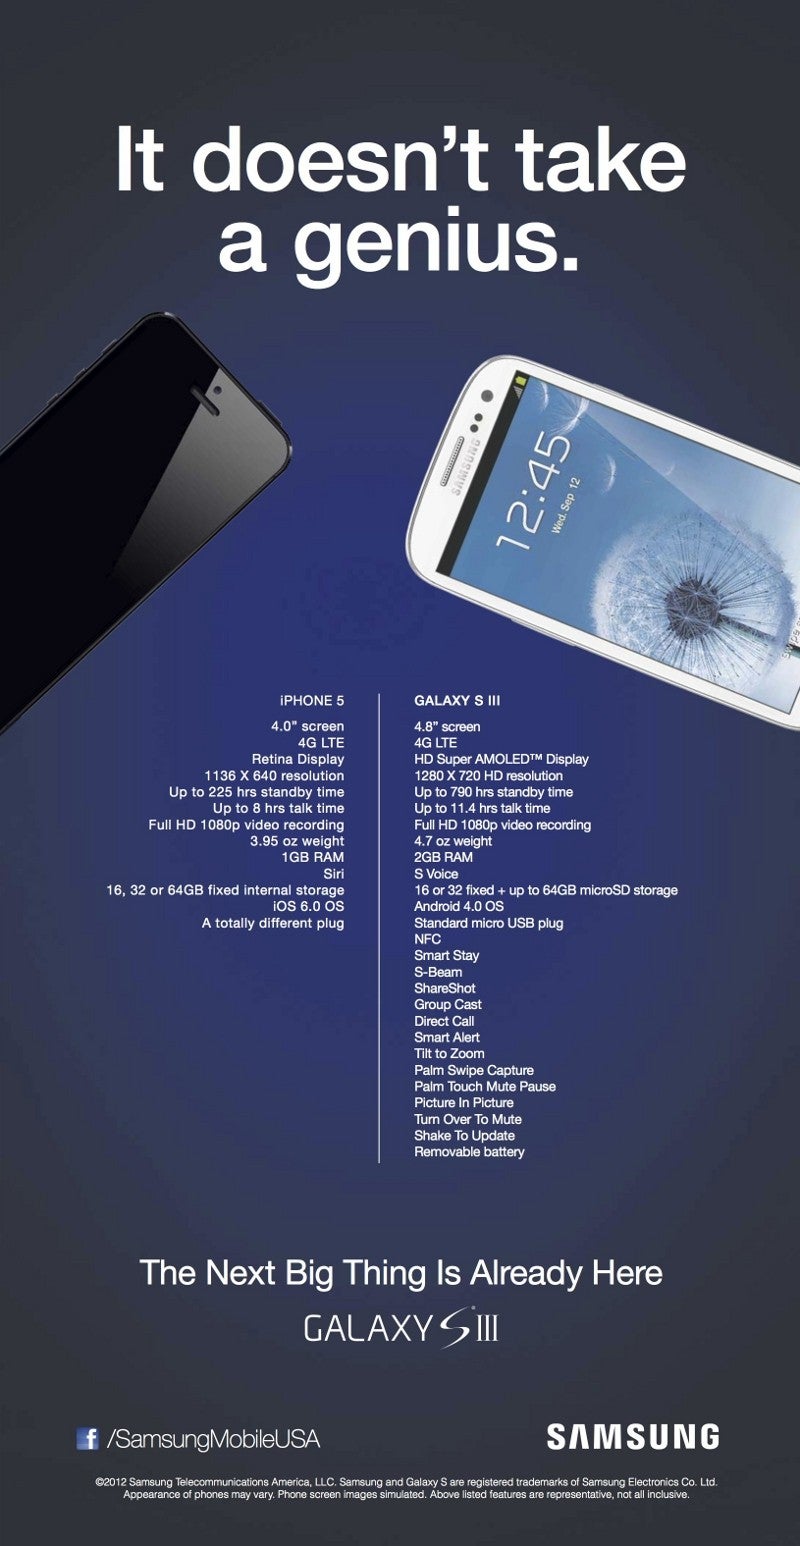 Here's the ad Samsung is running against the iPhone 5 launch nationwide